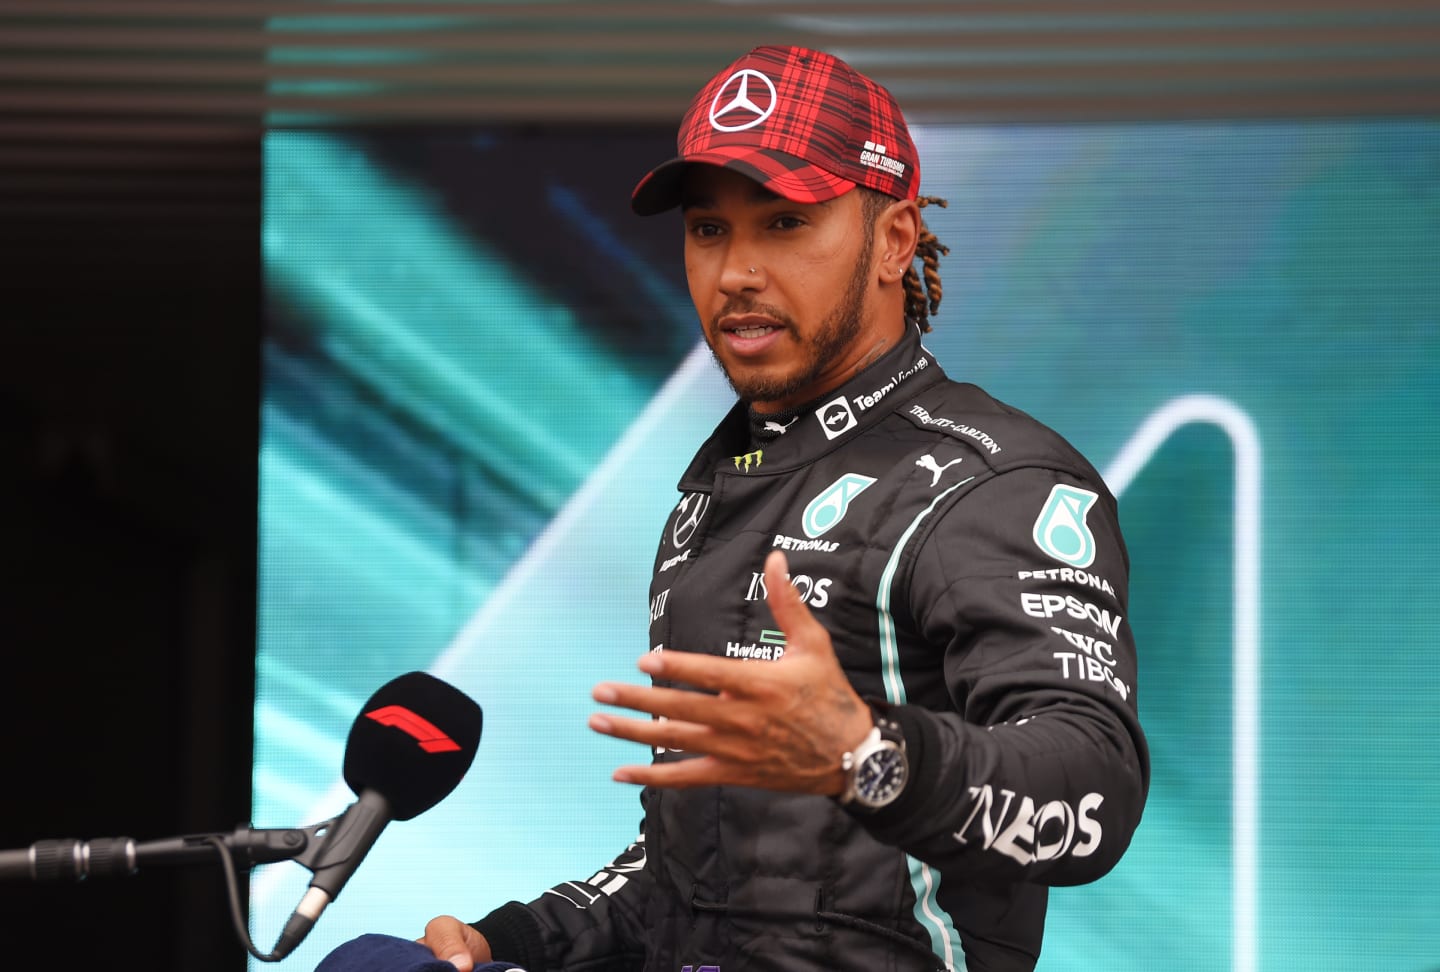 LE CASTELLET, FRANCE - JUNE 19: Second placed qualifier Lewis Hamilton of Great Britain and Mercedes GP is interviewed after qualifying ahead of the F1 Grand Prix of France at Circuit Paul Ricard on June 19, 2021 in Le Castellet, France. (Photo by Nicolas Tucat - Pool/Getty Images)